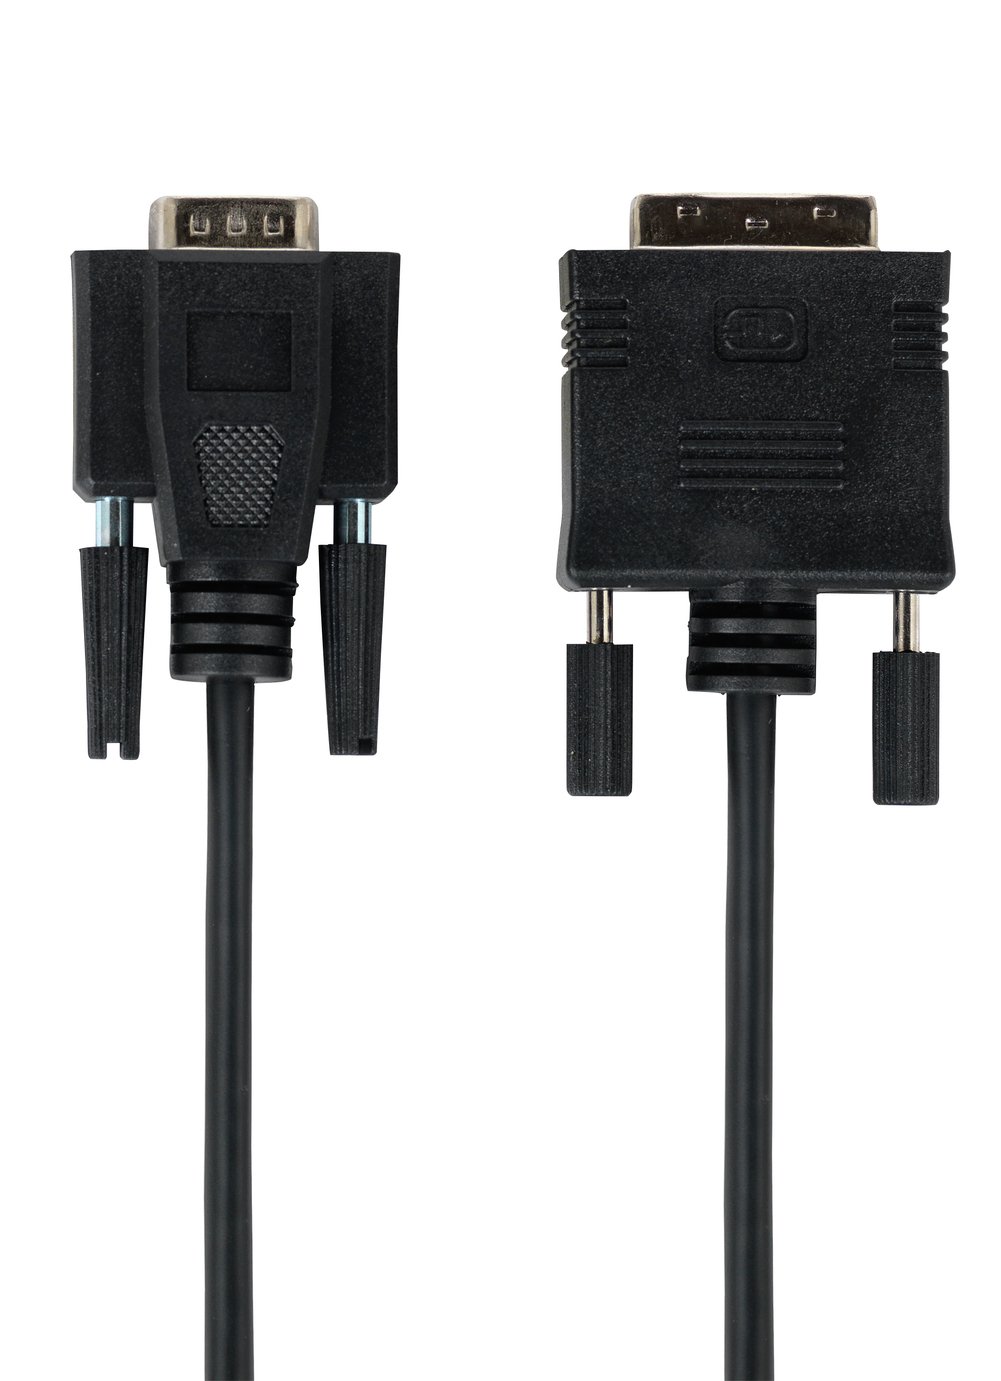 3m DVI to VGA Cable Review